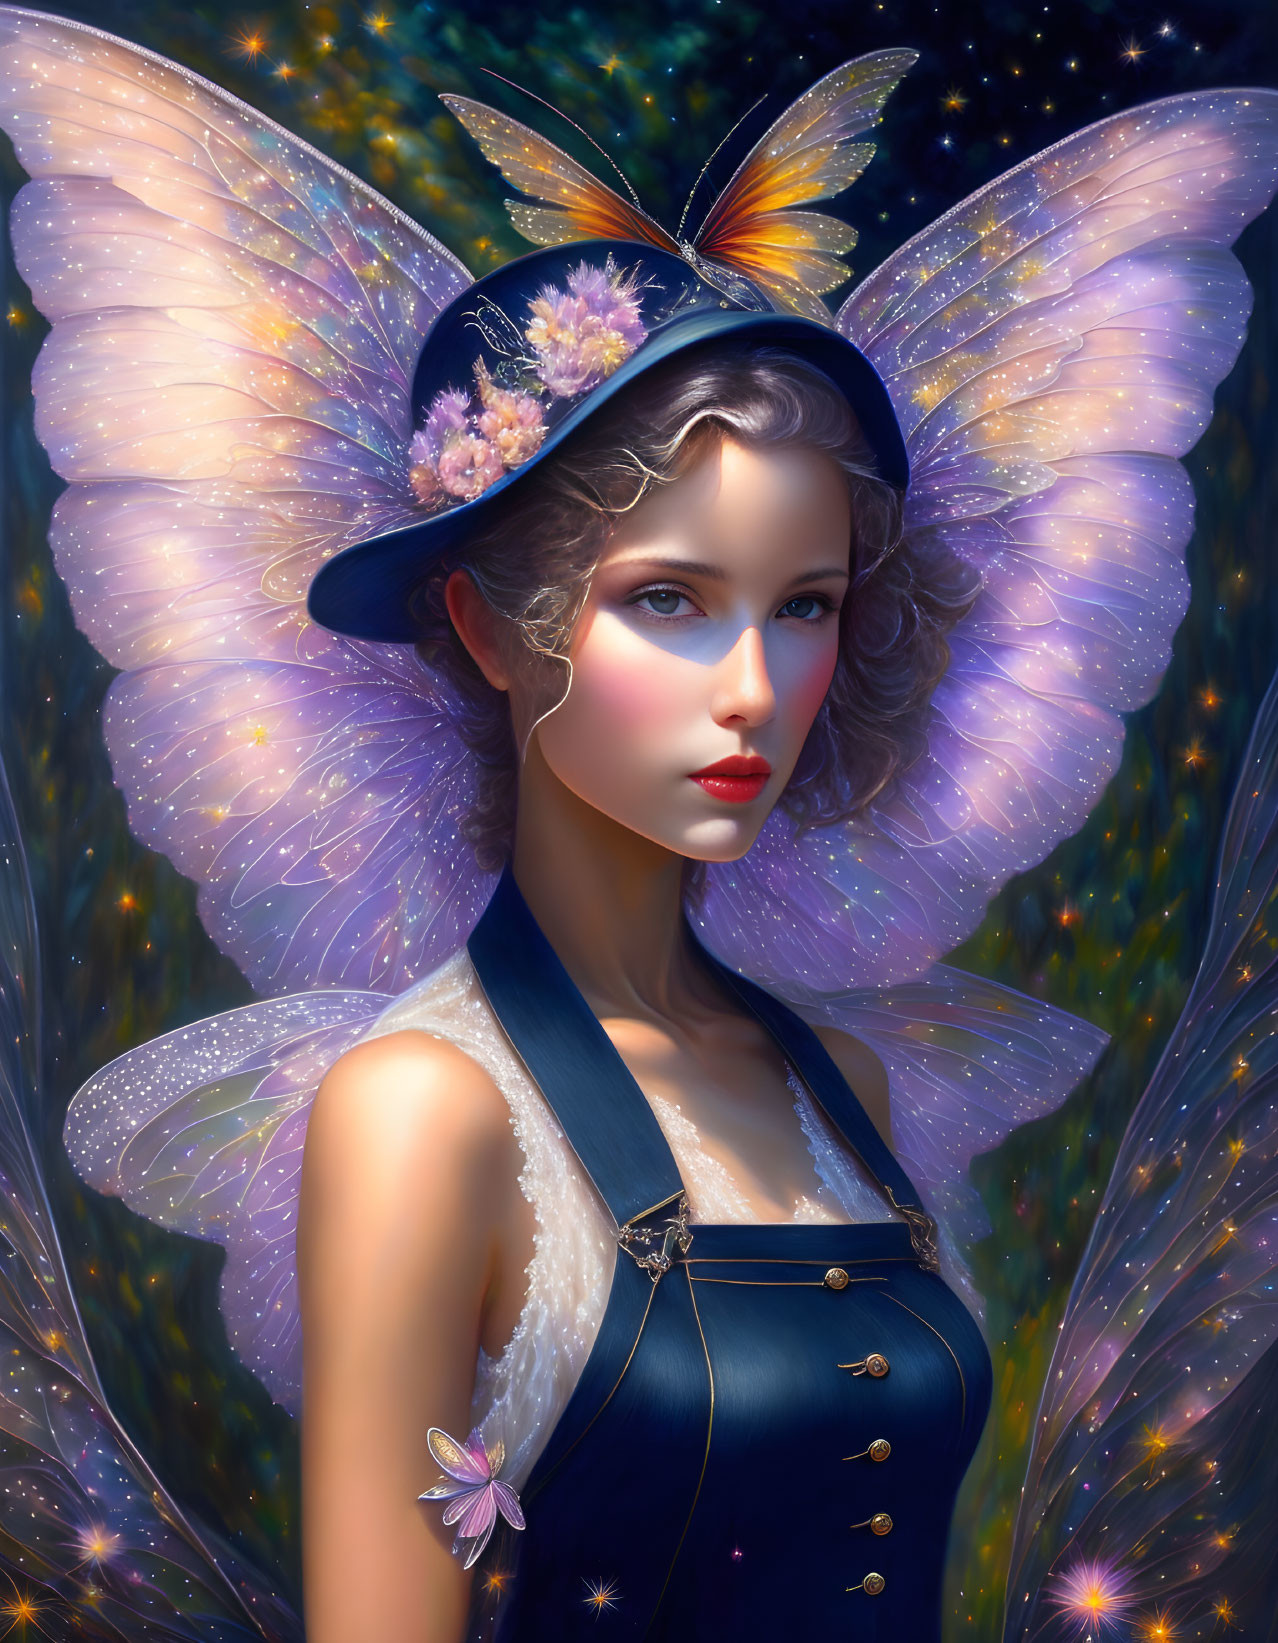 Digital Art: Young Woman with Butterfly Wings and Stylish Hat